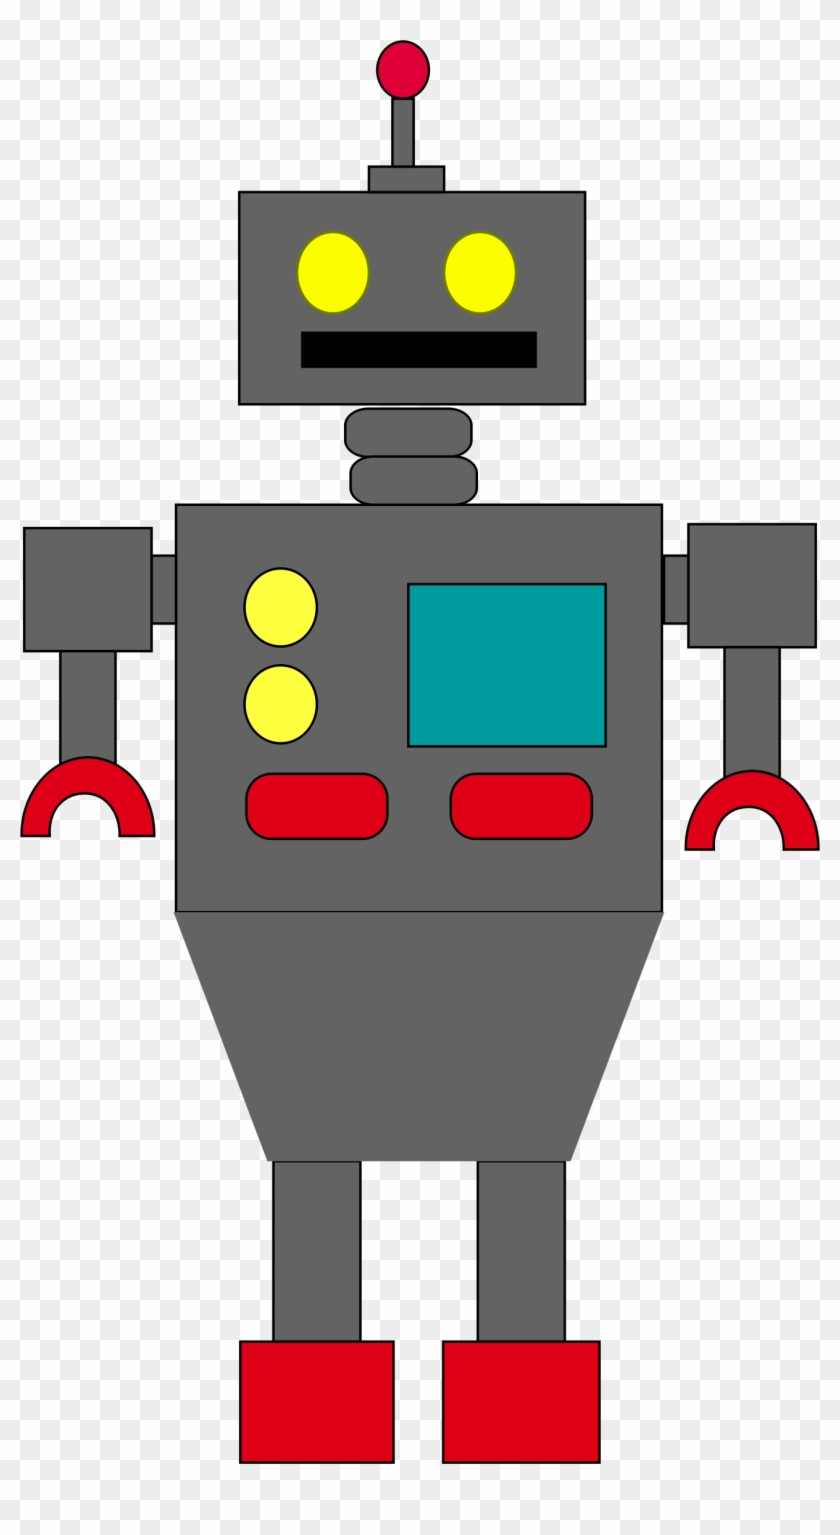 This Free Icons Png Design Of My Robot - Cartoon Clipart #5258901